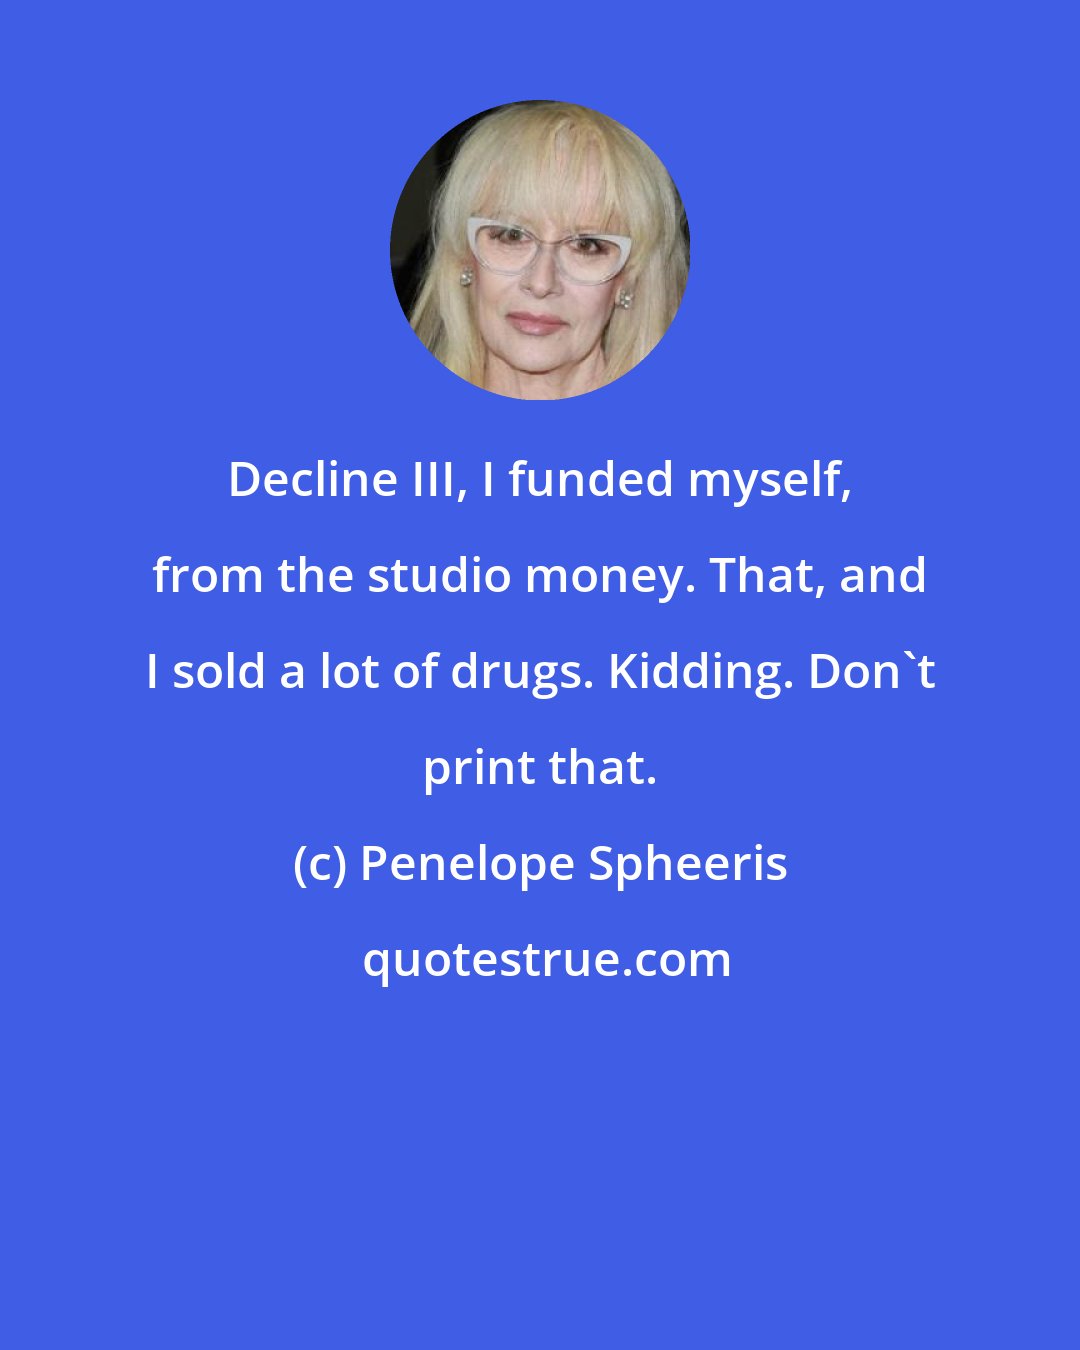 Penelope Spheeris: Decline III, I funded myself, from the studio money. That, and I sold a lot of drugs. Kidding. Don't print that.